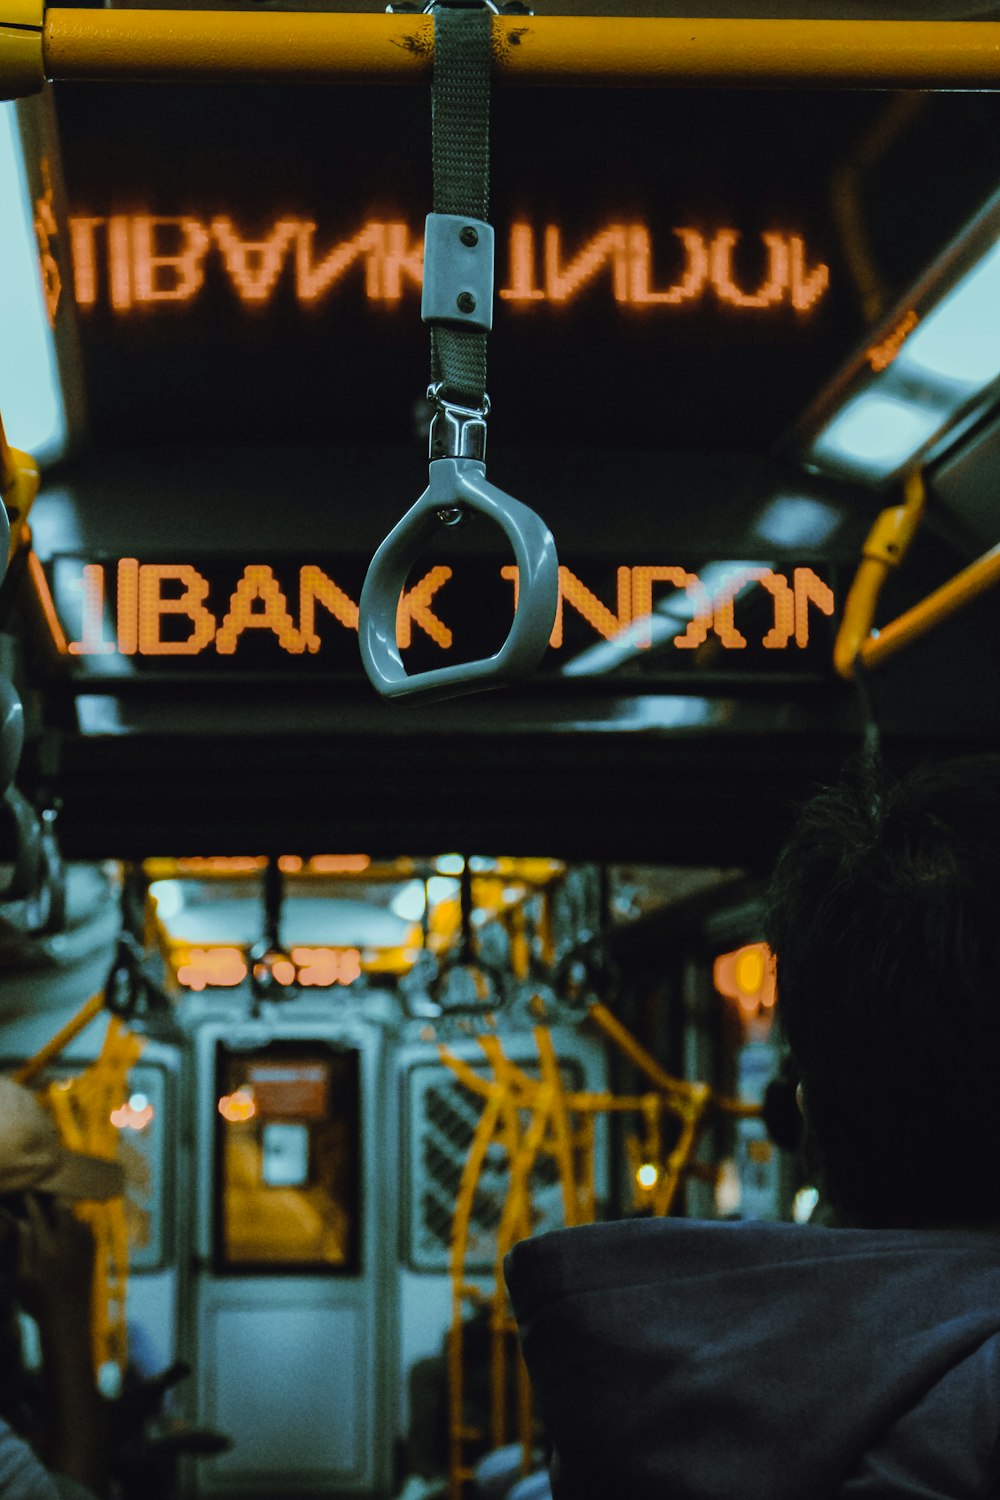 a person on a bus with a neon sign in the background